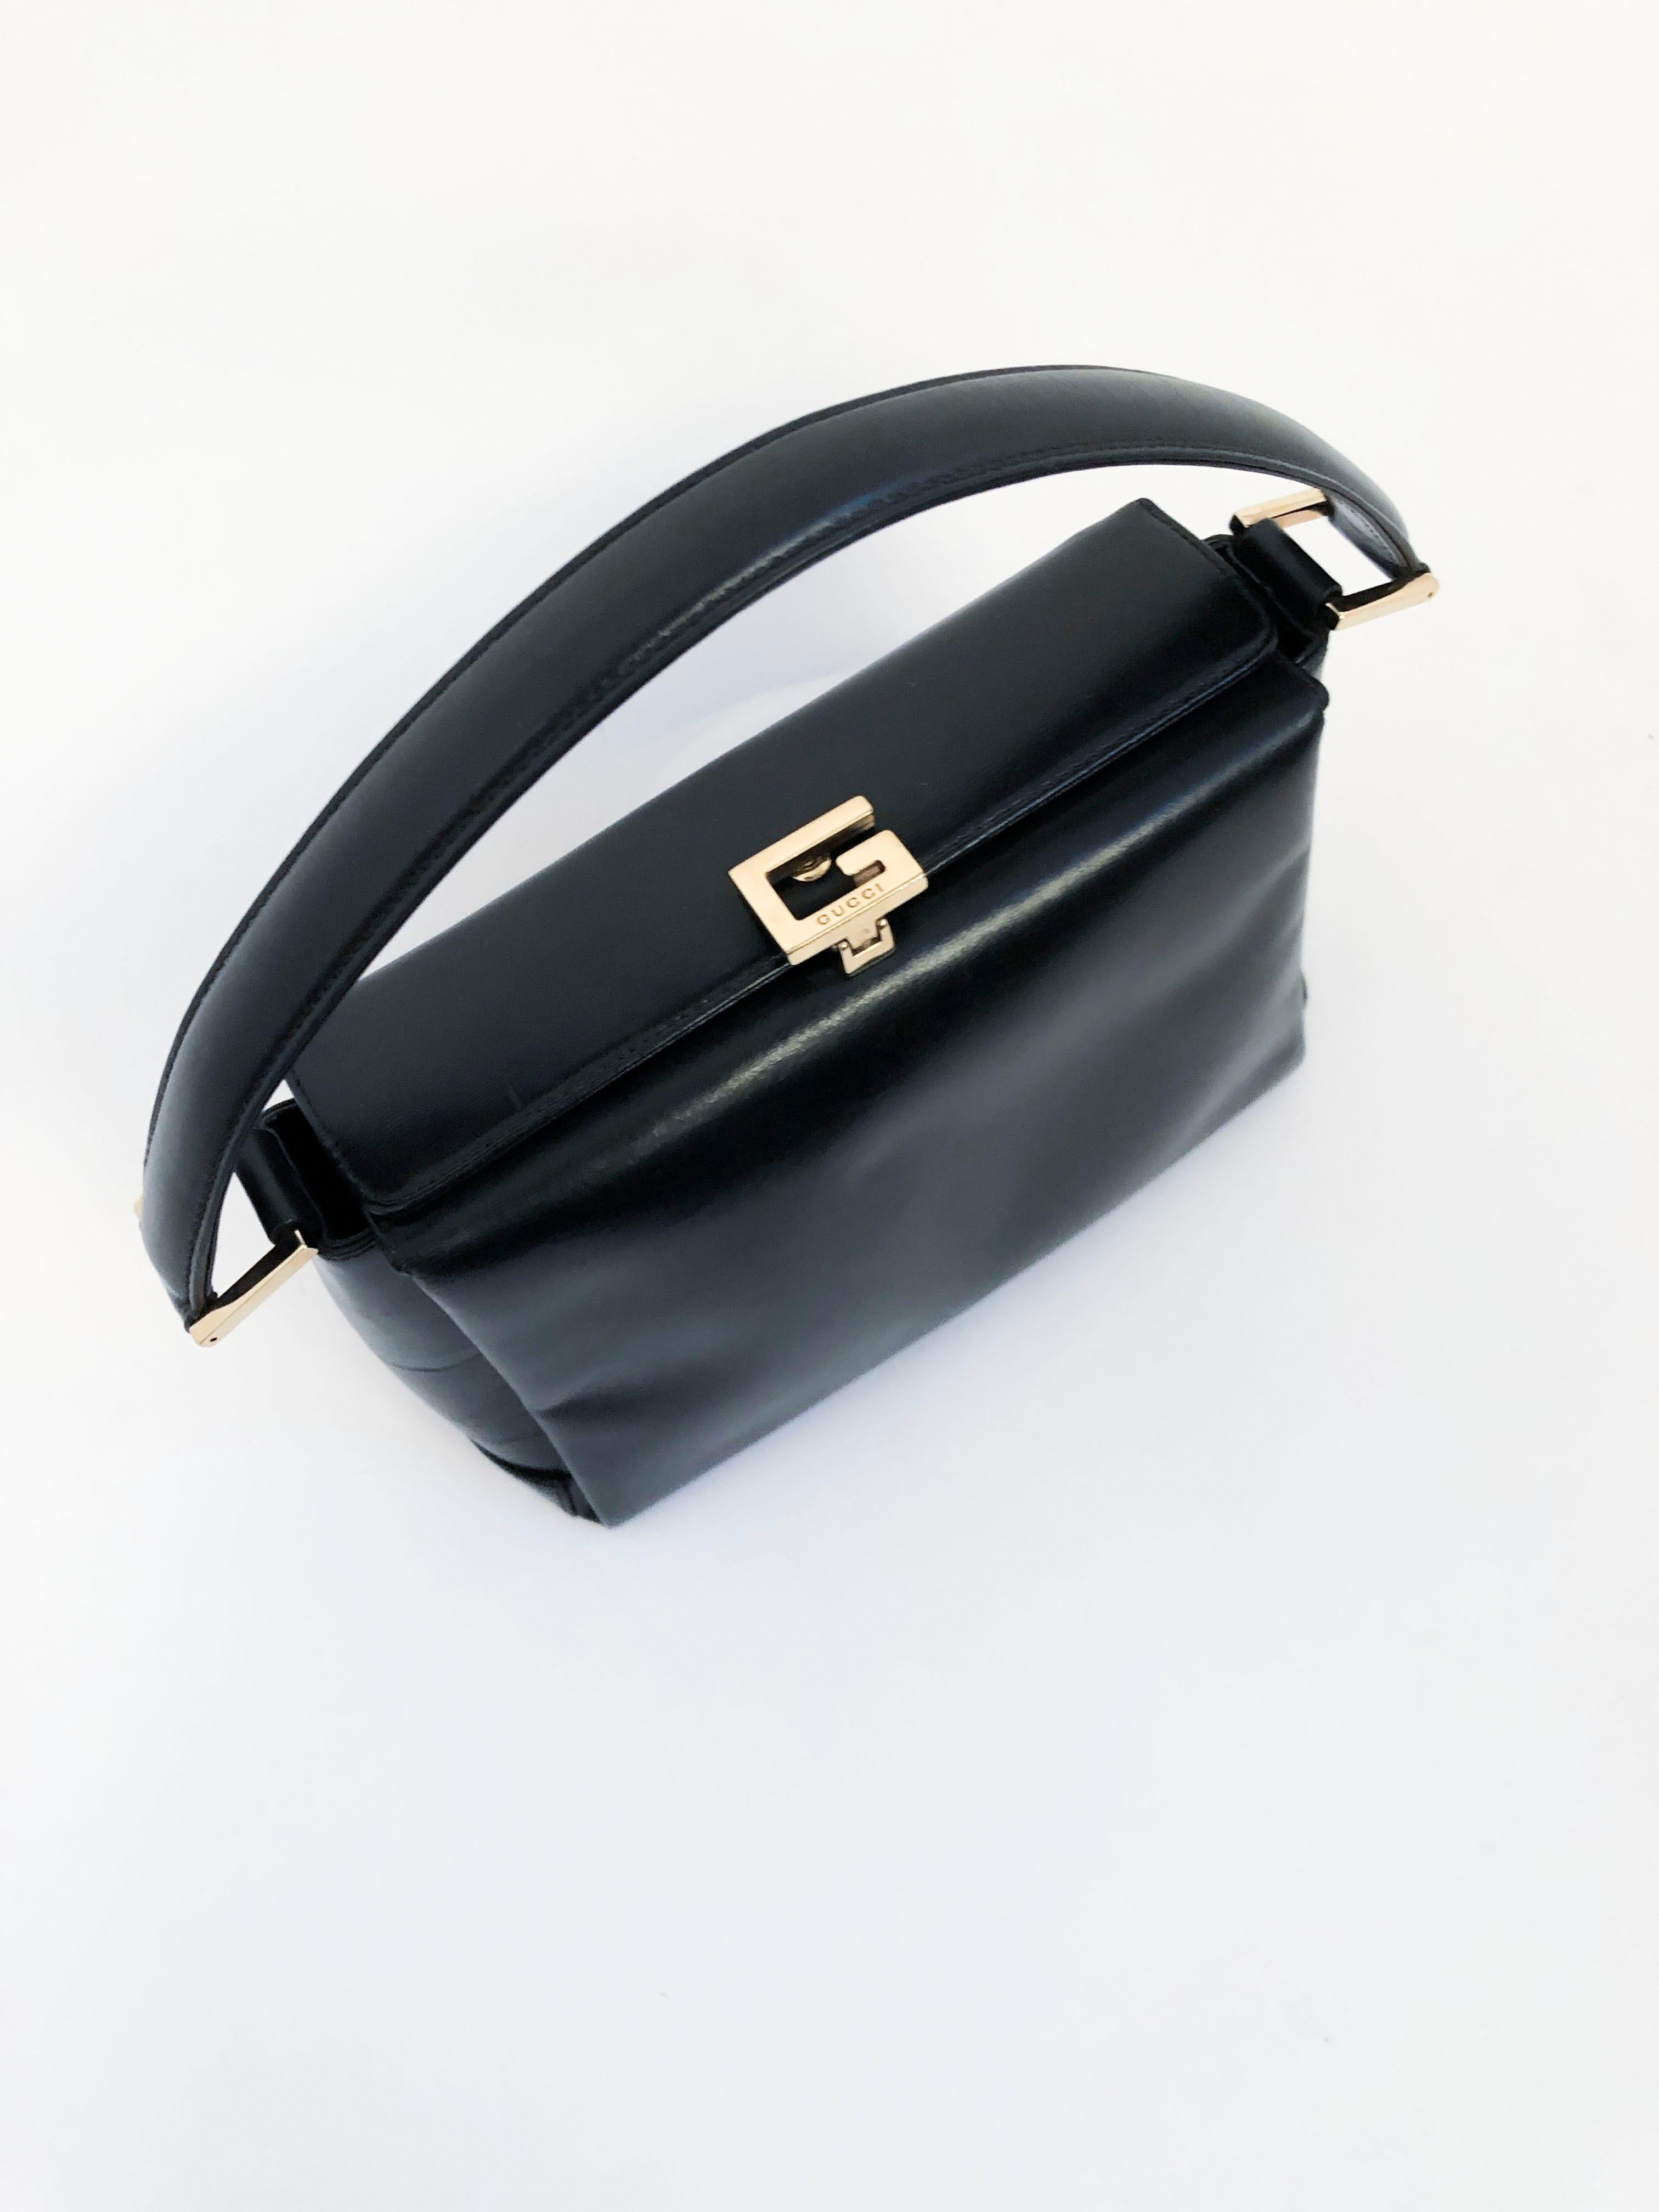 Black Gucci leather handbag with bras hardware and a latch closure with the Gucci 